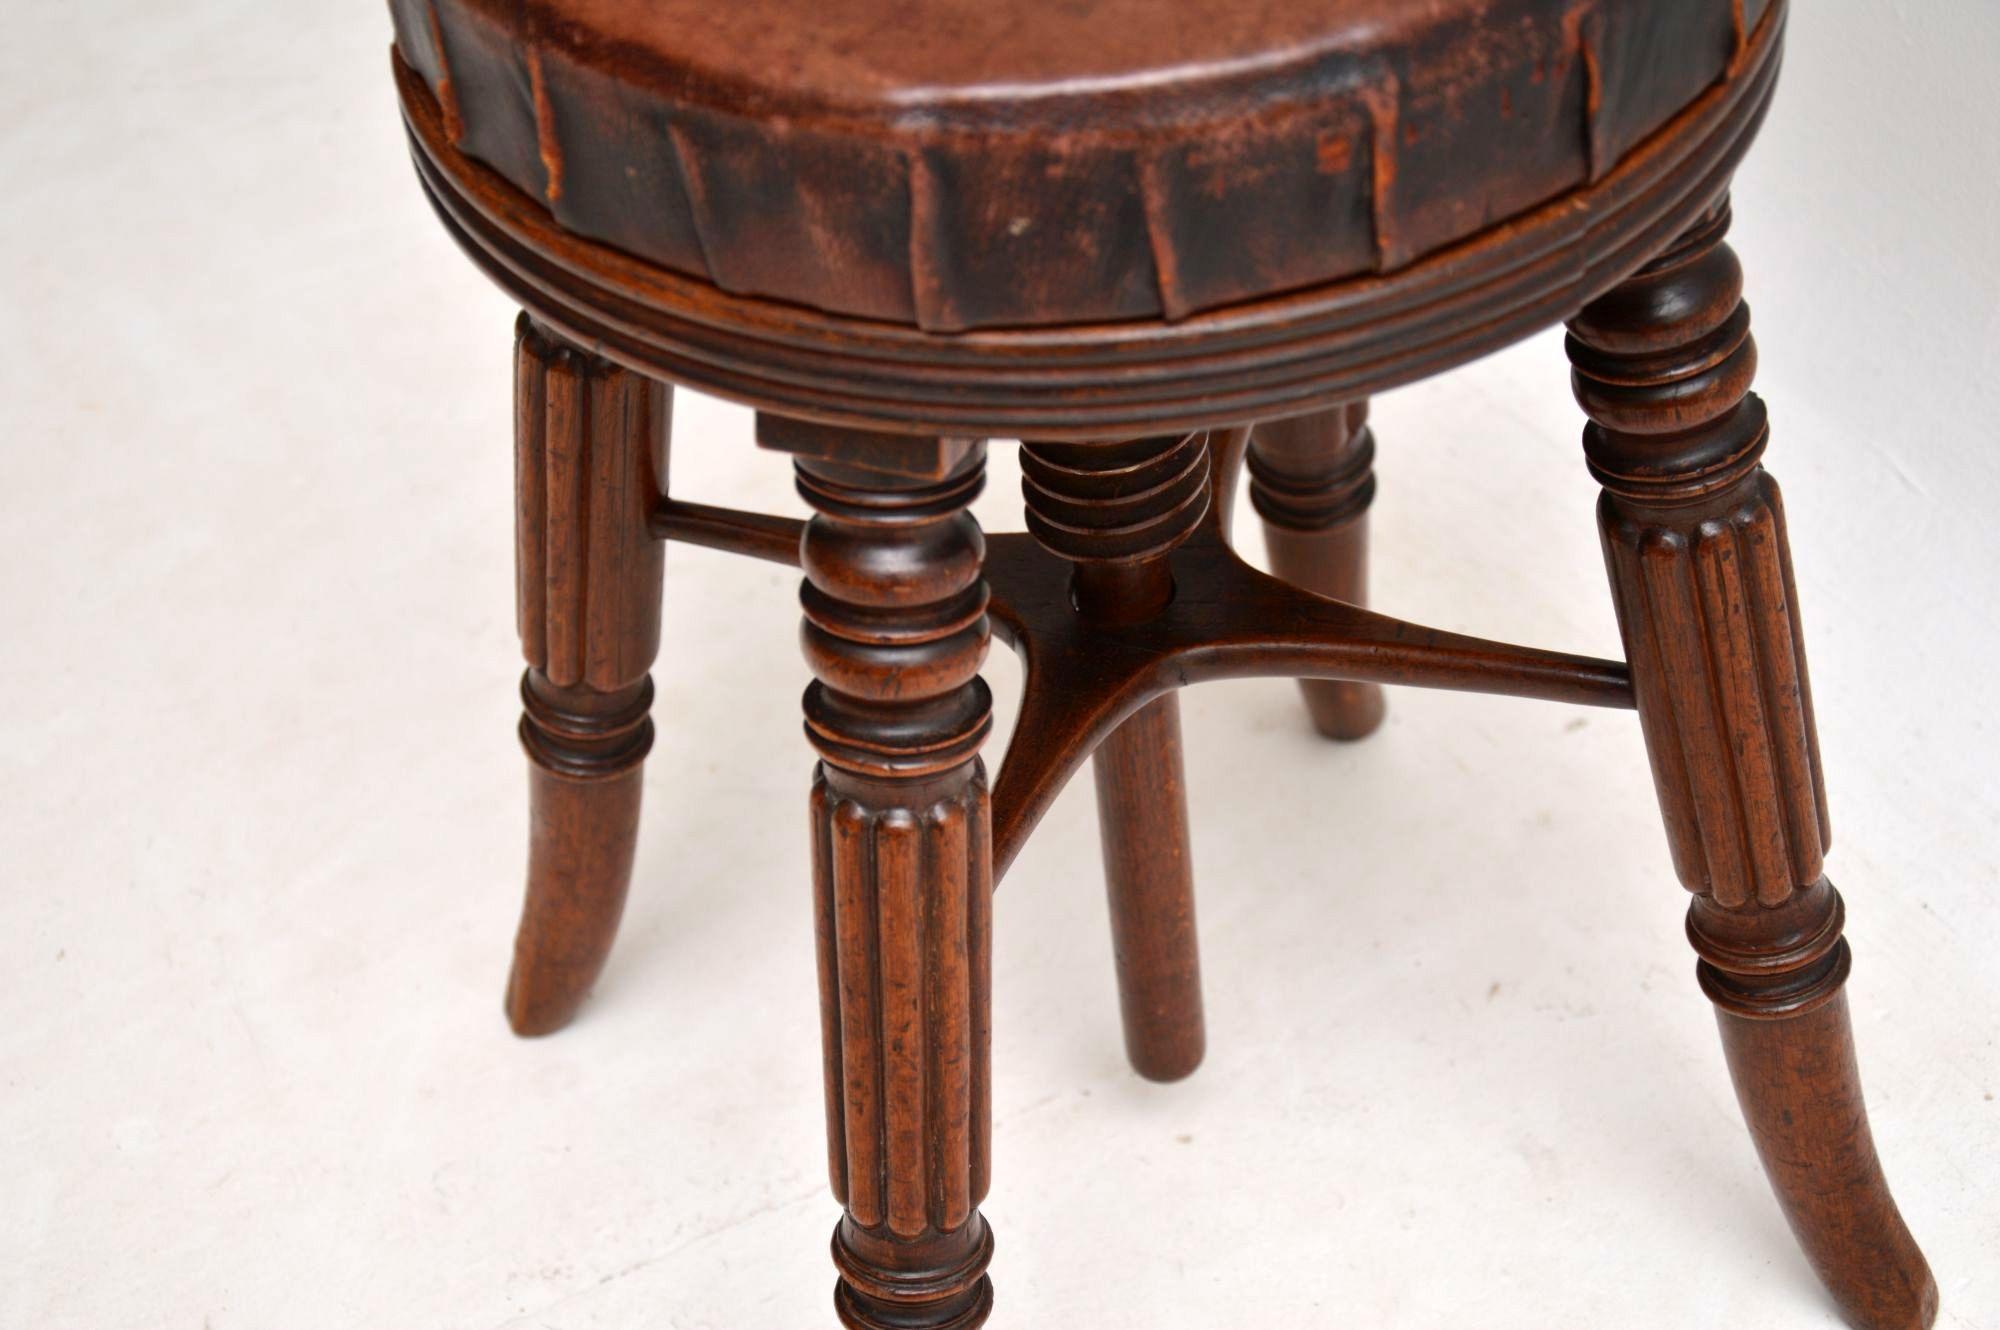 Mid-19th Century Antique Victorian Mahogany and Leather Adjustable Piano Stool